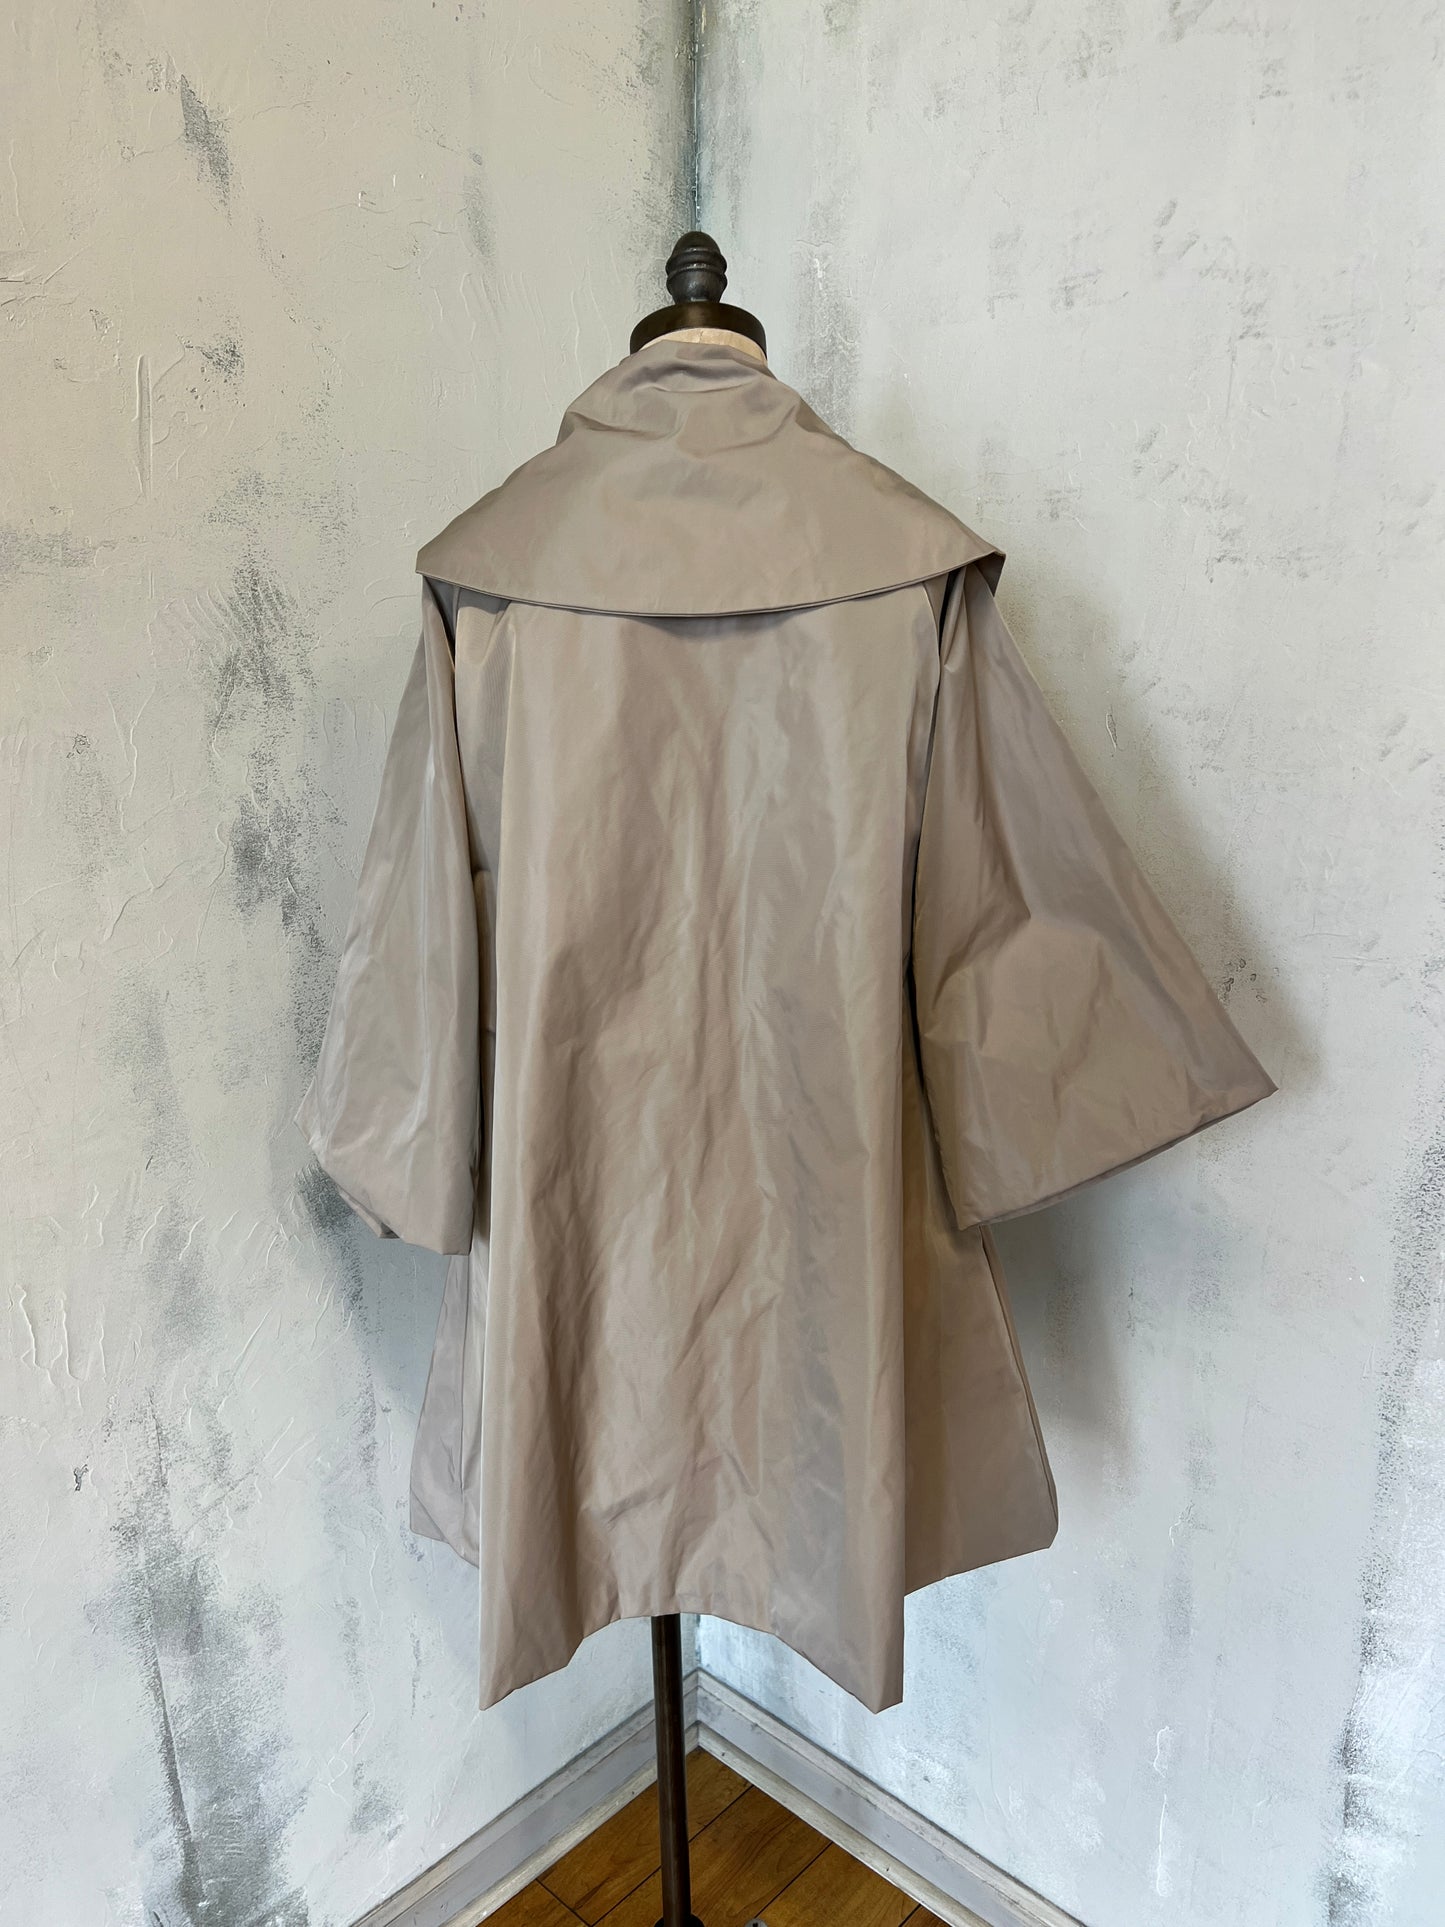 Emily Coat in Taupe